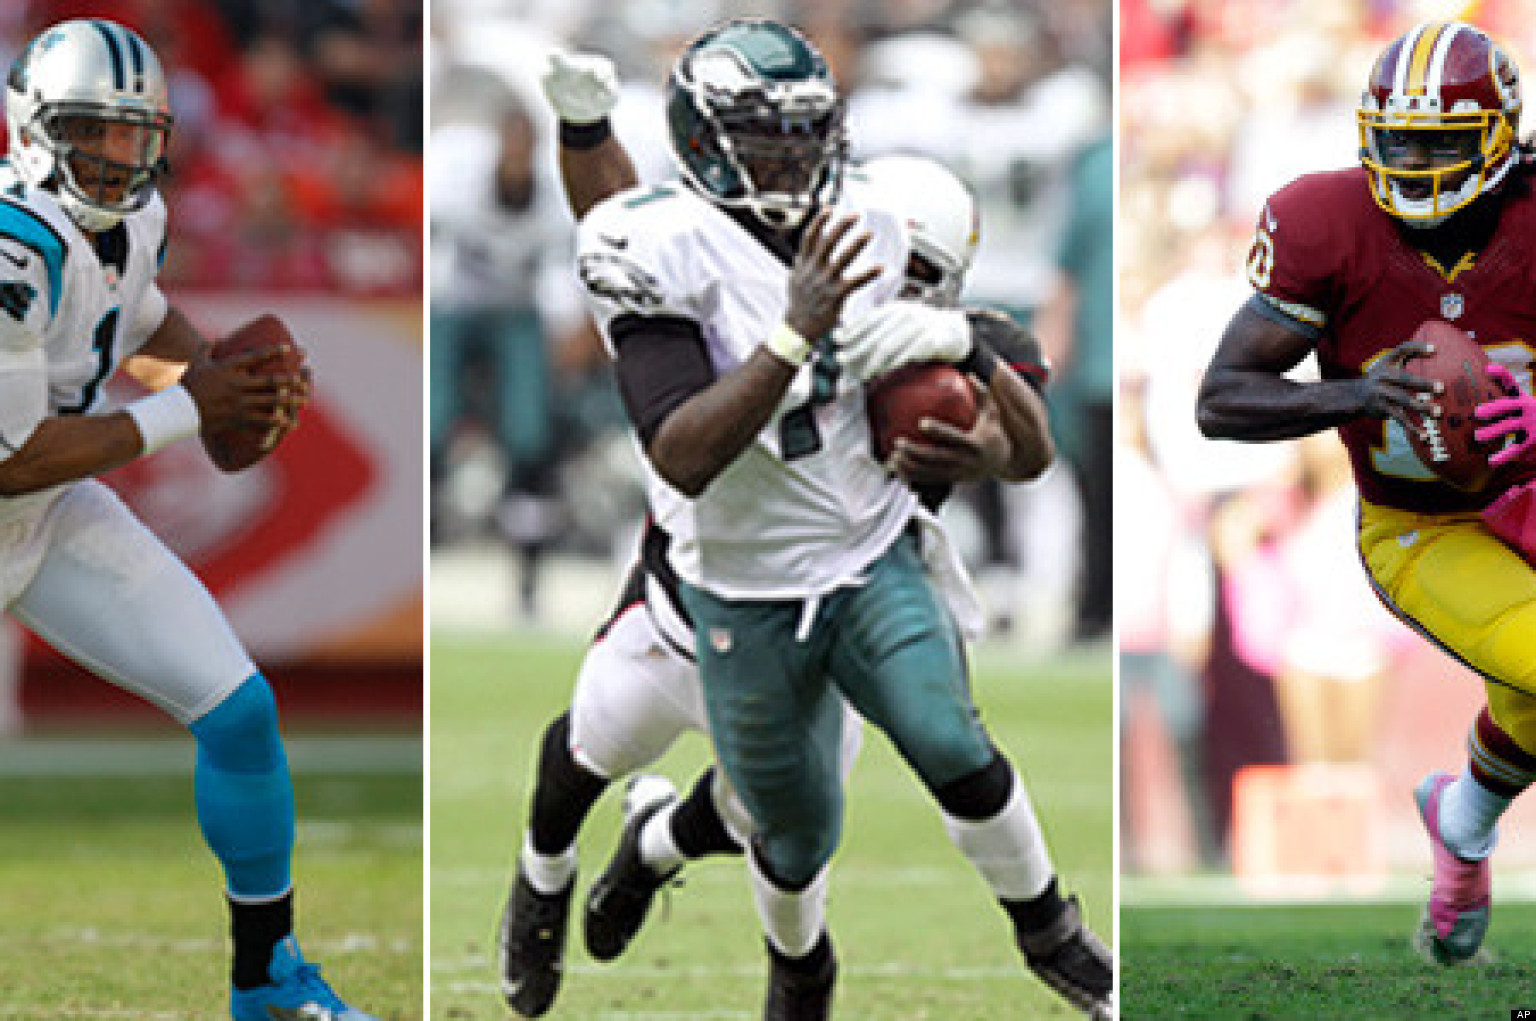 Michael Vick Claims He's Fastest Quarterback In NFL What Do You Think